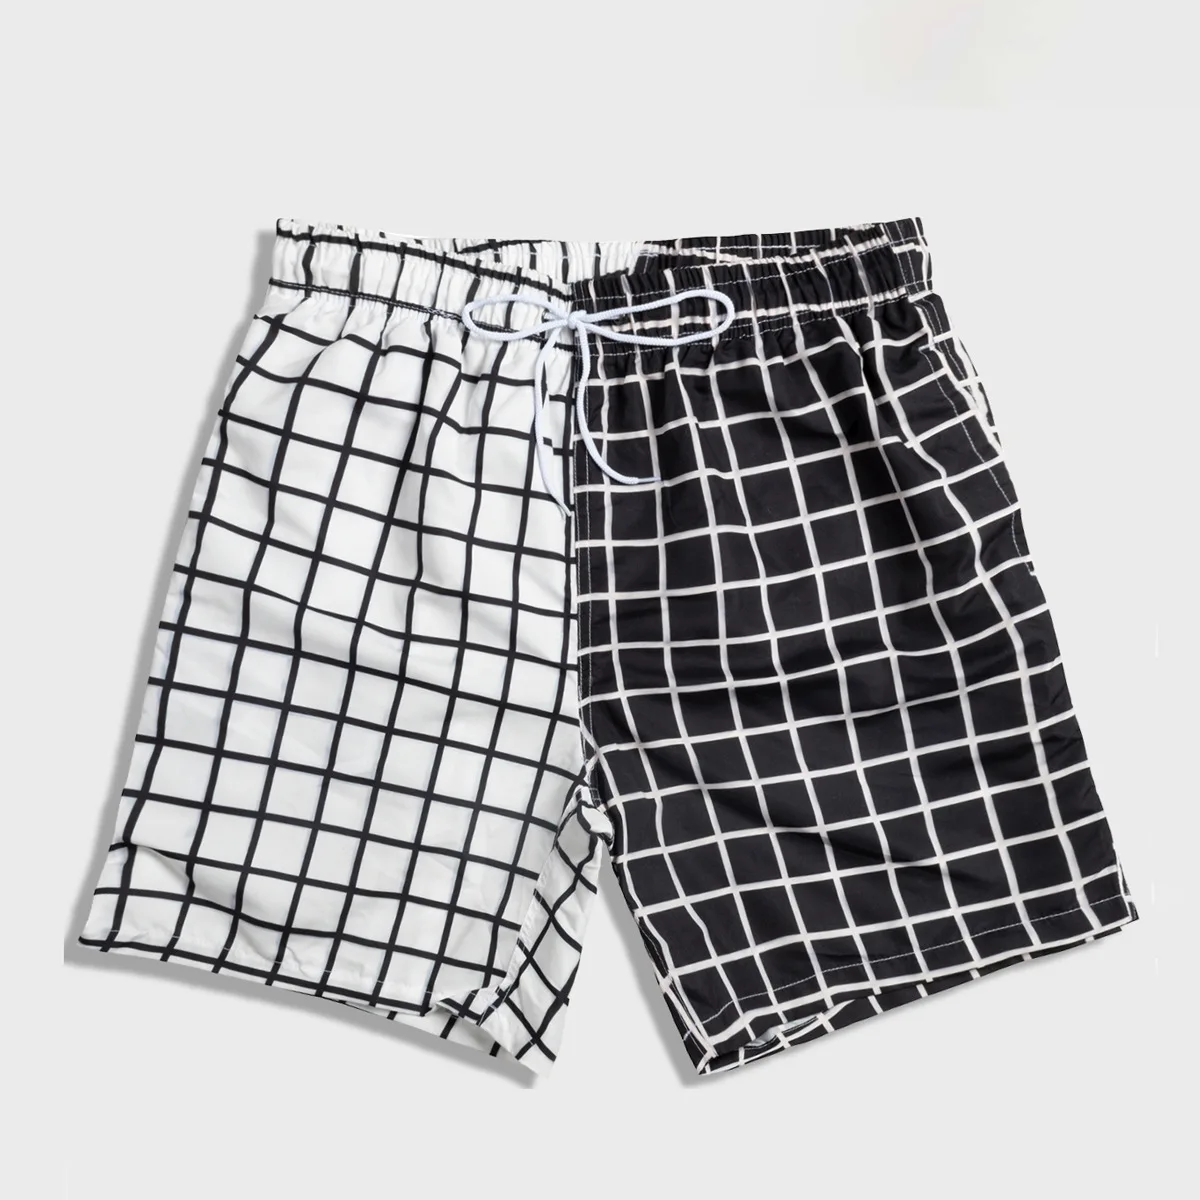 Summer new men's adult refreshing loose boxer sports shorts casual and comfortable beach shorts black and white plaid